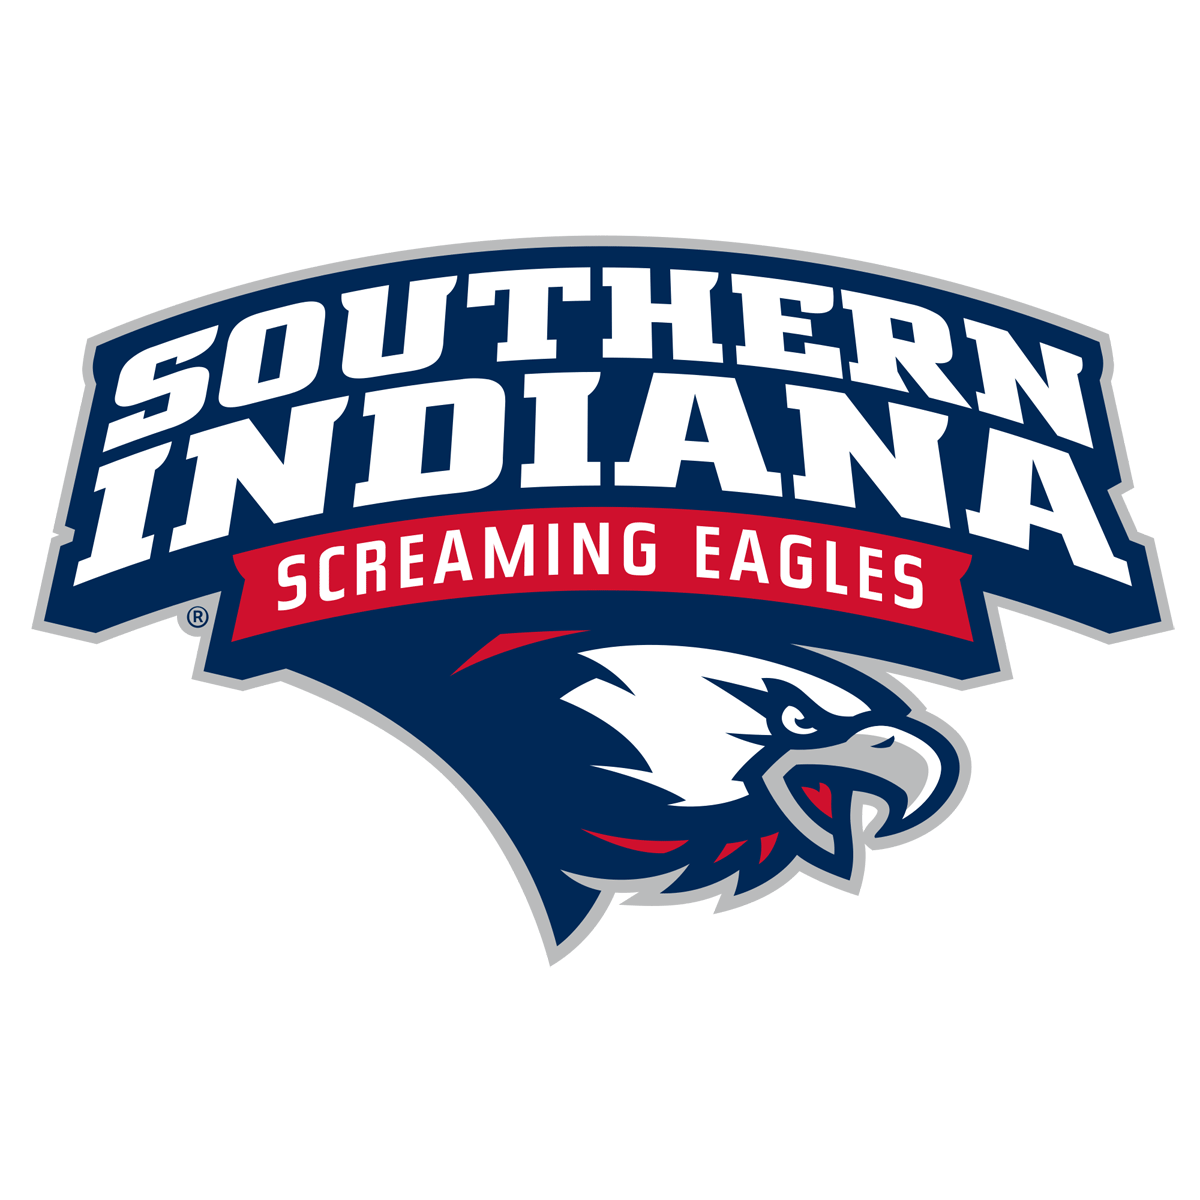 Southern Indiana Screaming Eagles logo PNG